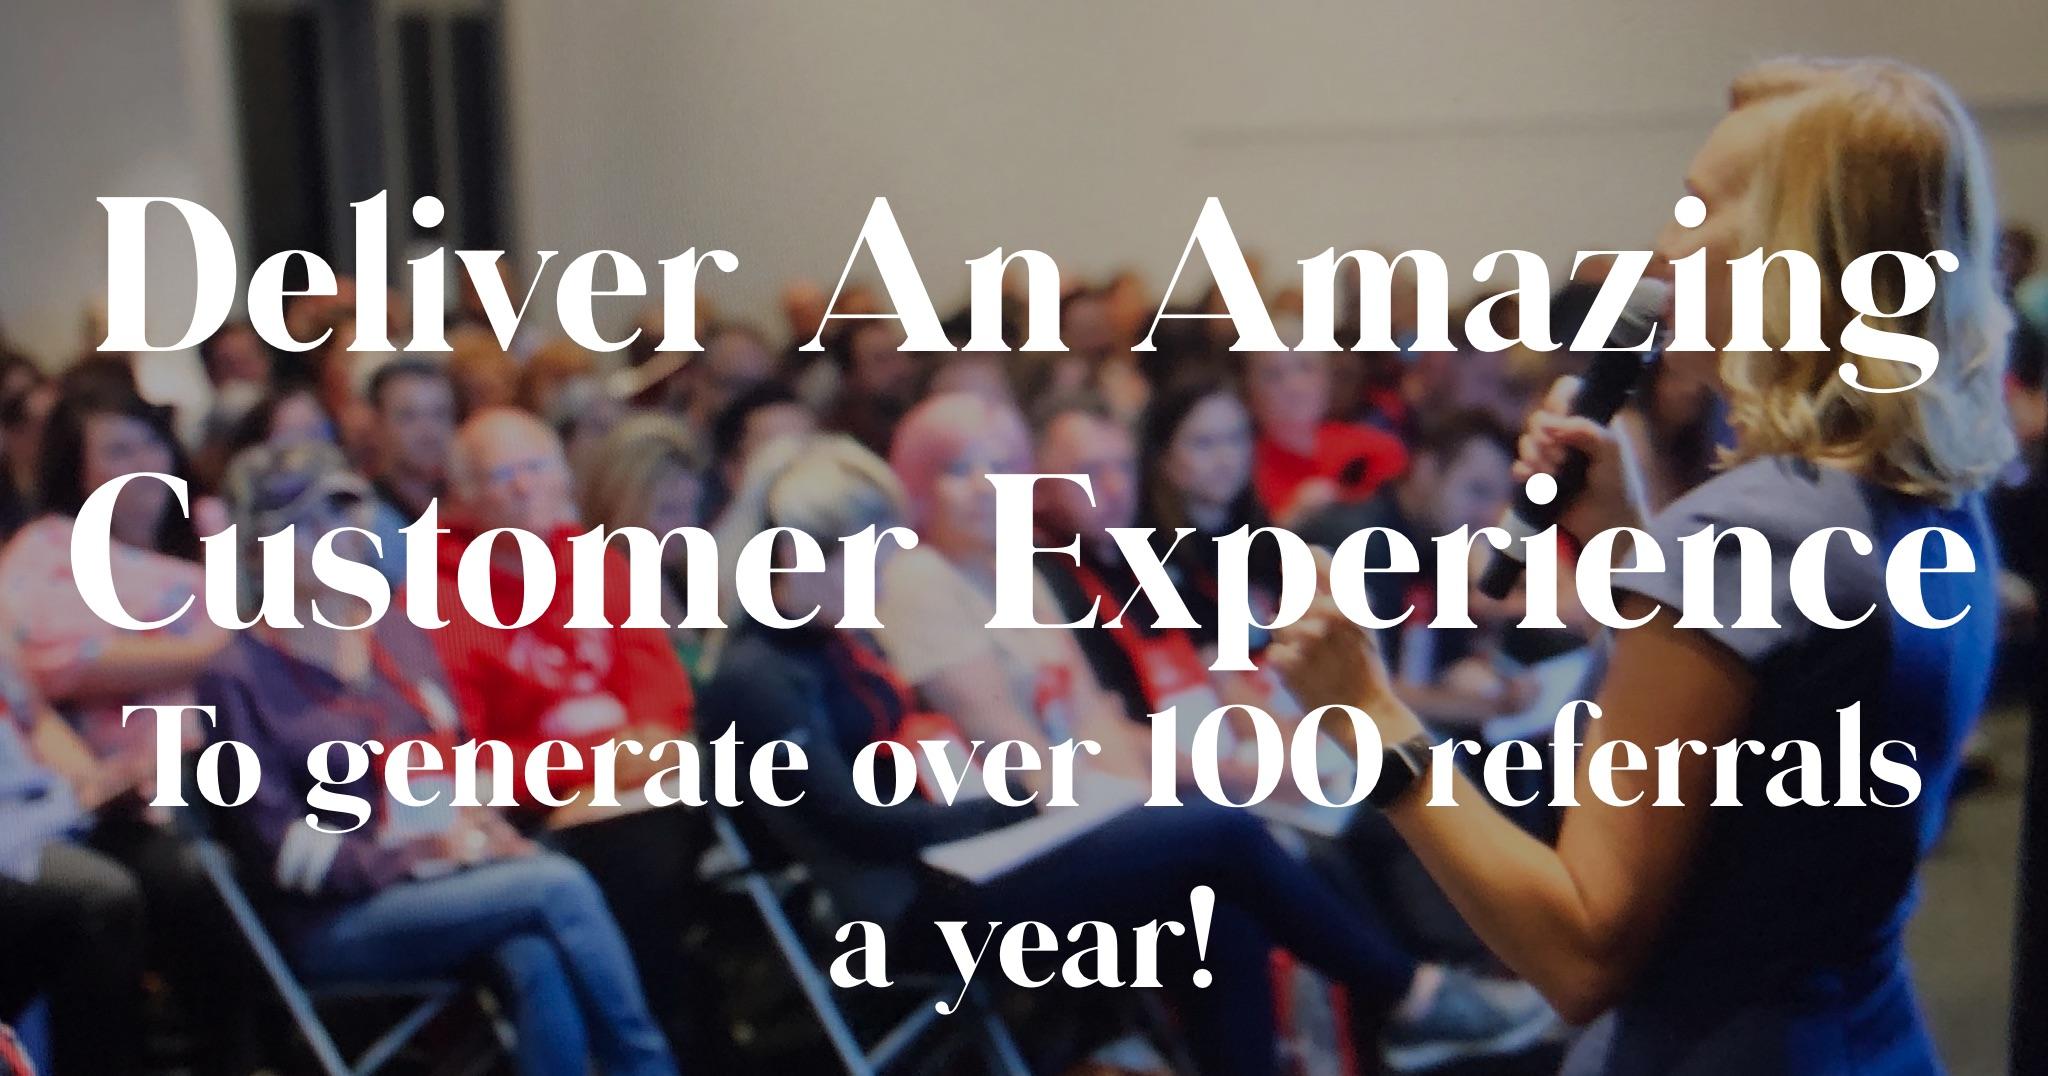 Deliver an Amazing Customer Experience: Generate 100 Referrals a Year!